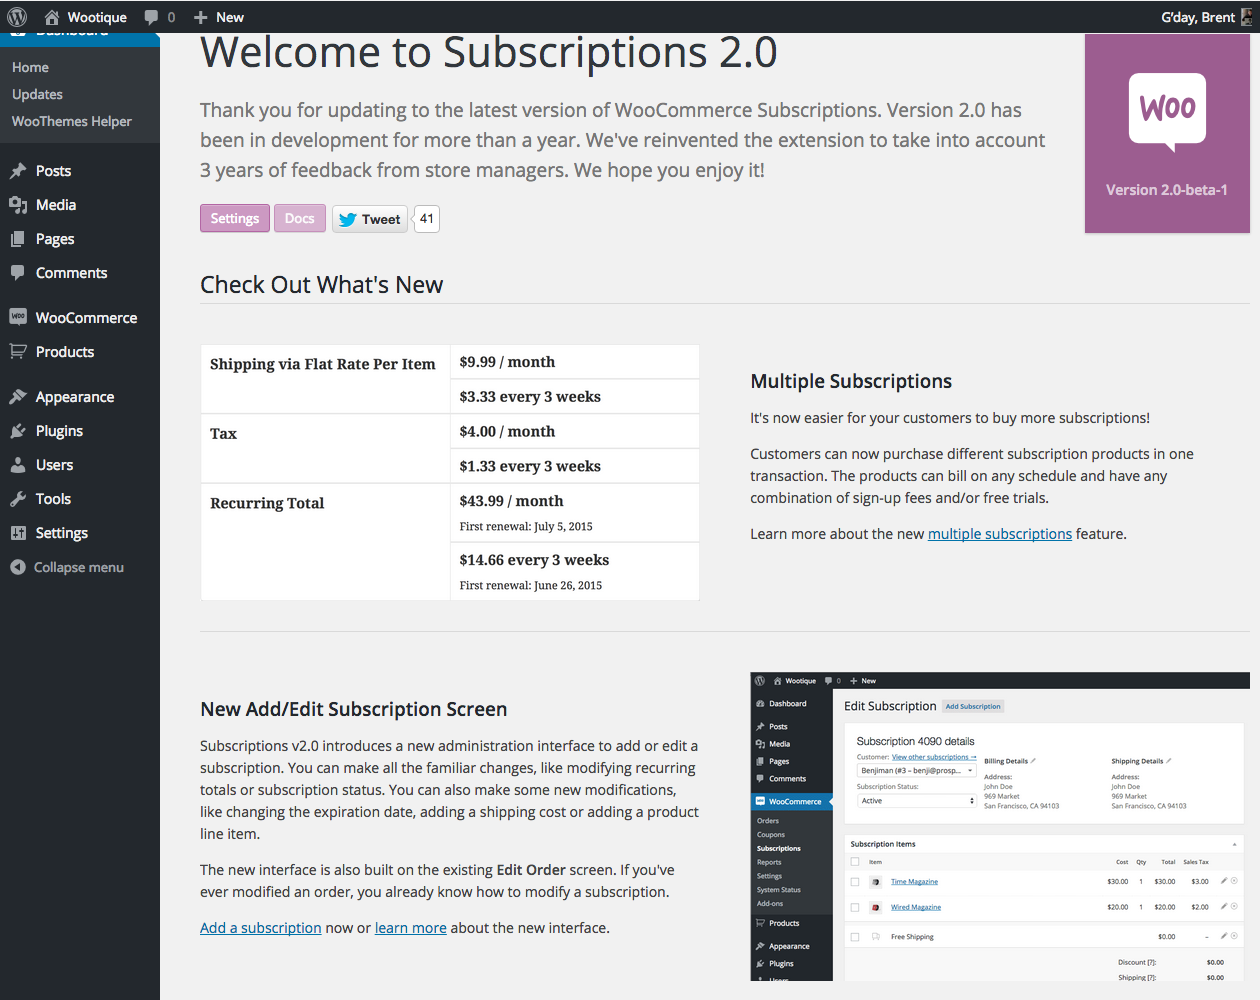 Subscriptions v2.0 Welcome Screen